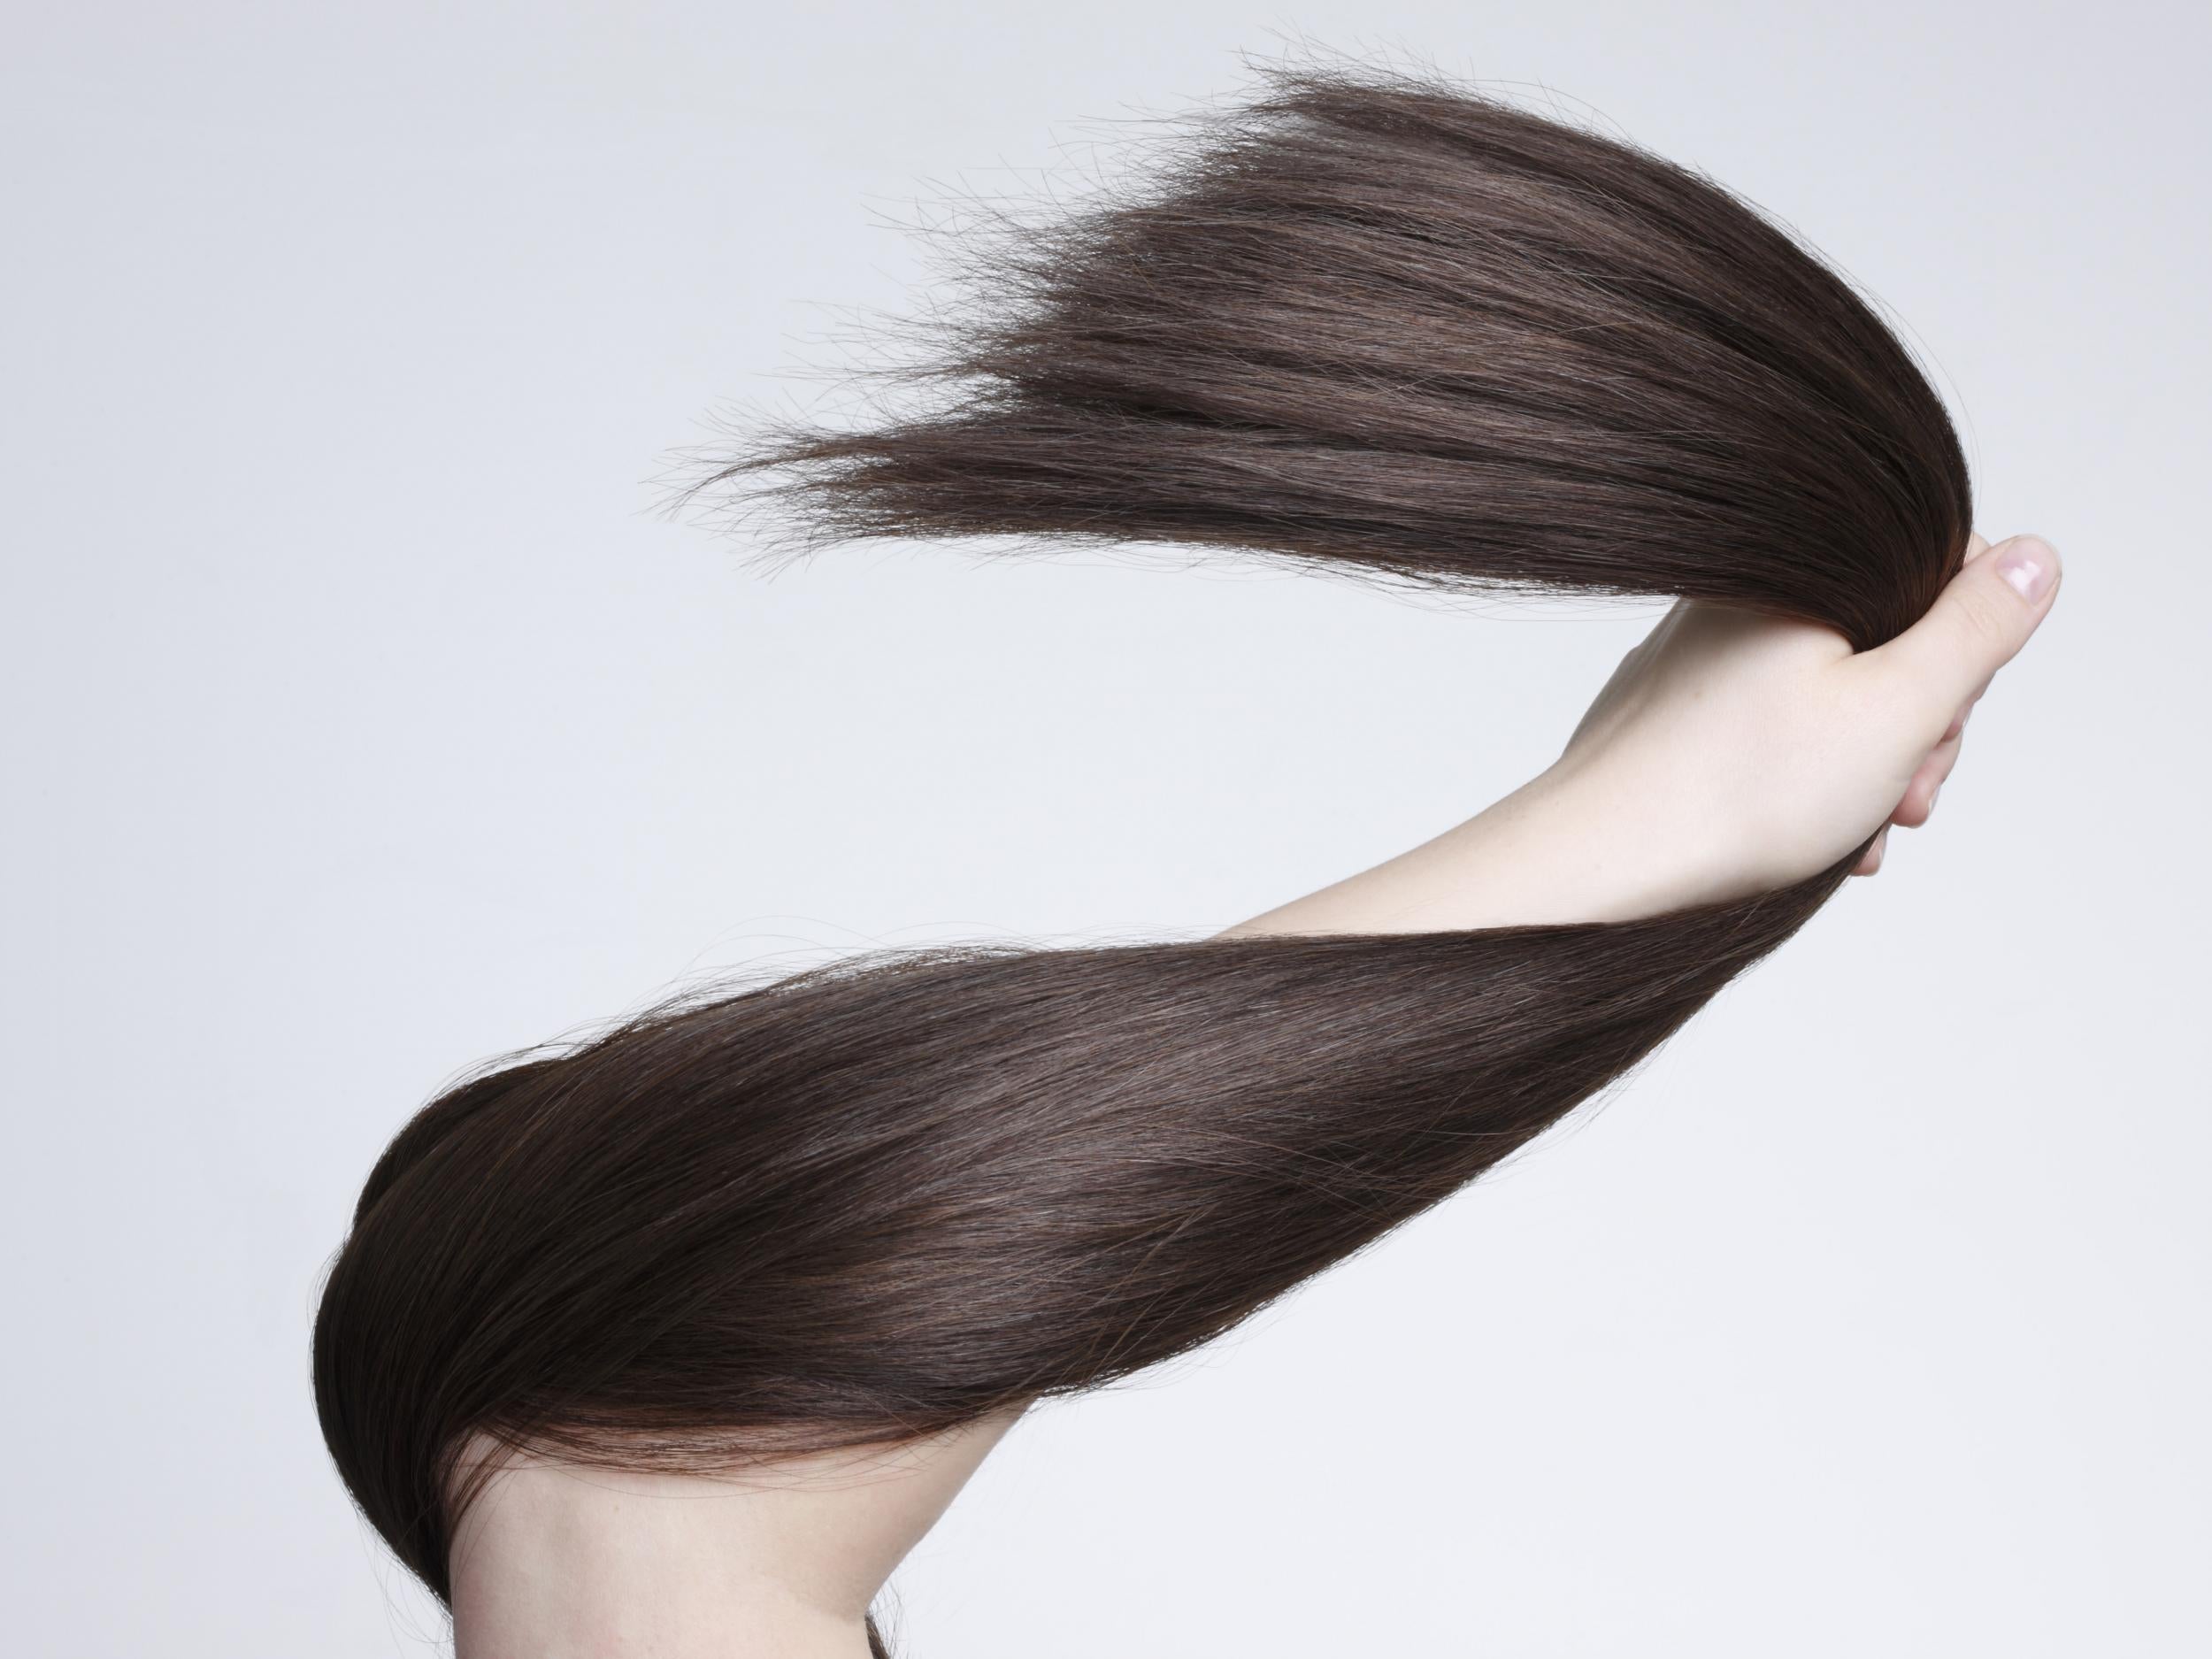 On average we shed between 50 to 100 hairs a day